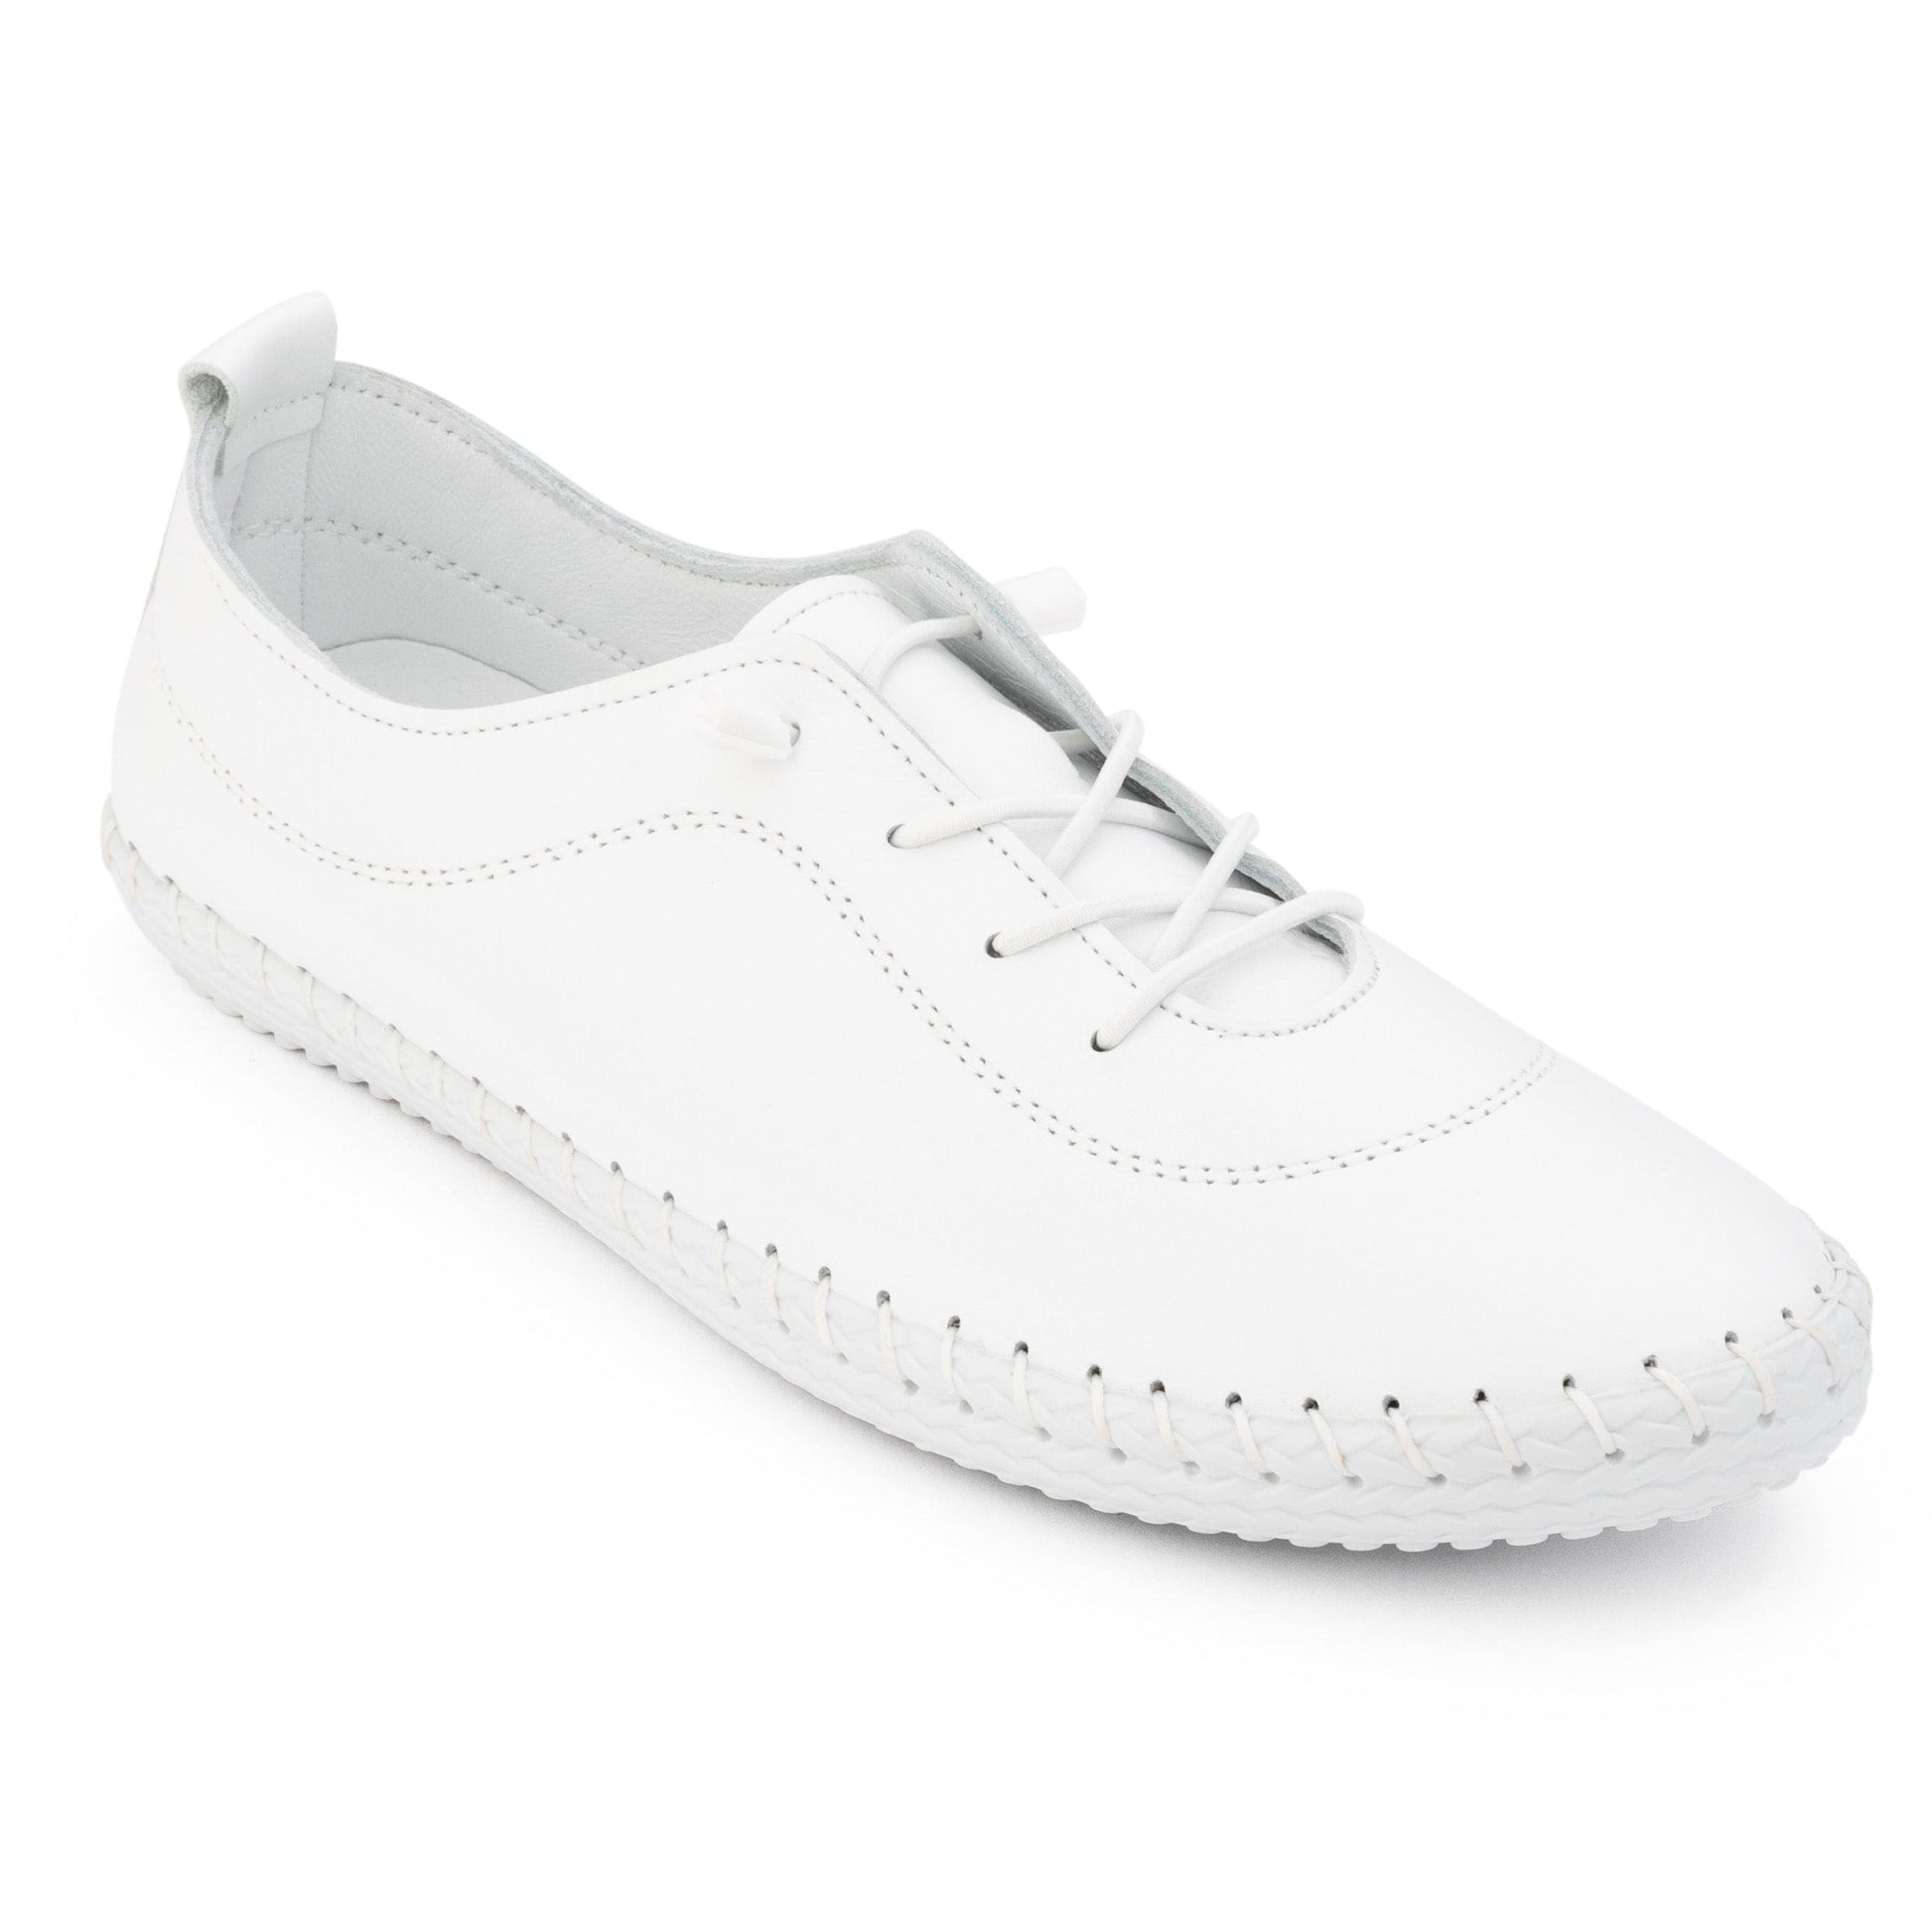 Soft leather women’s sneaker, breathable